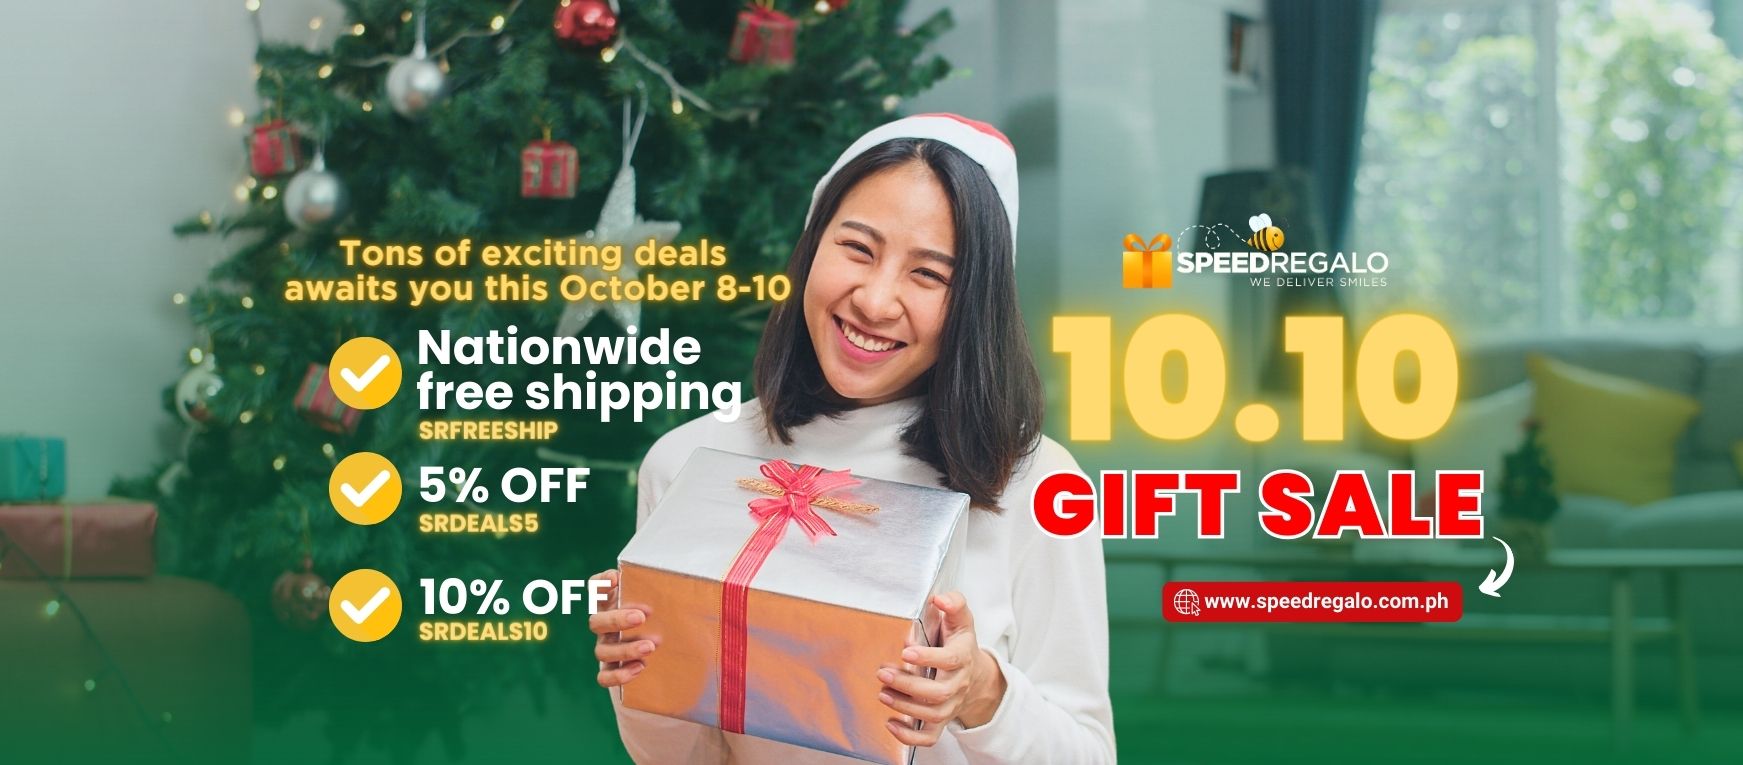 Unwrap the Best Deals: Your Guide to the 10.10 Gift Sale!